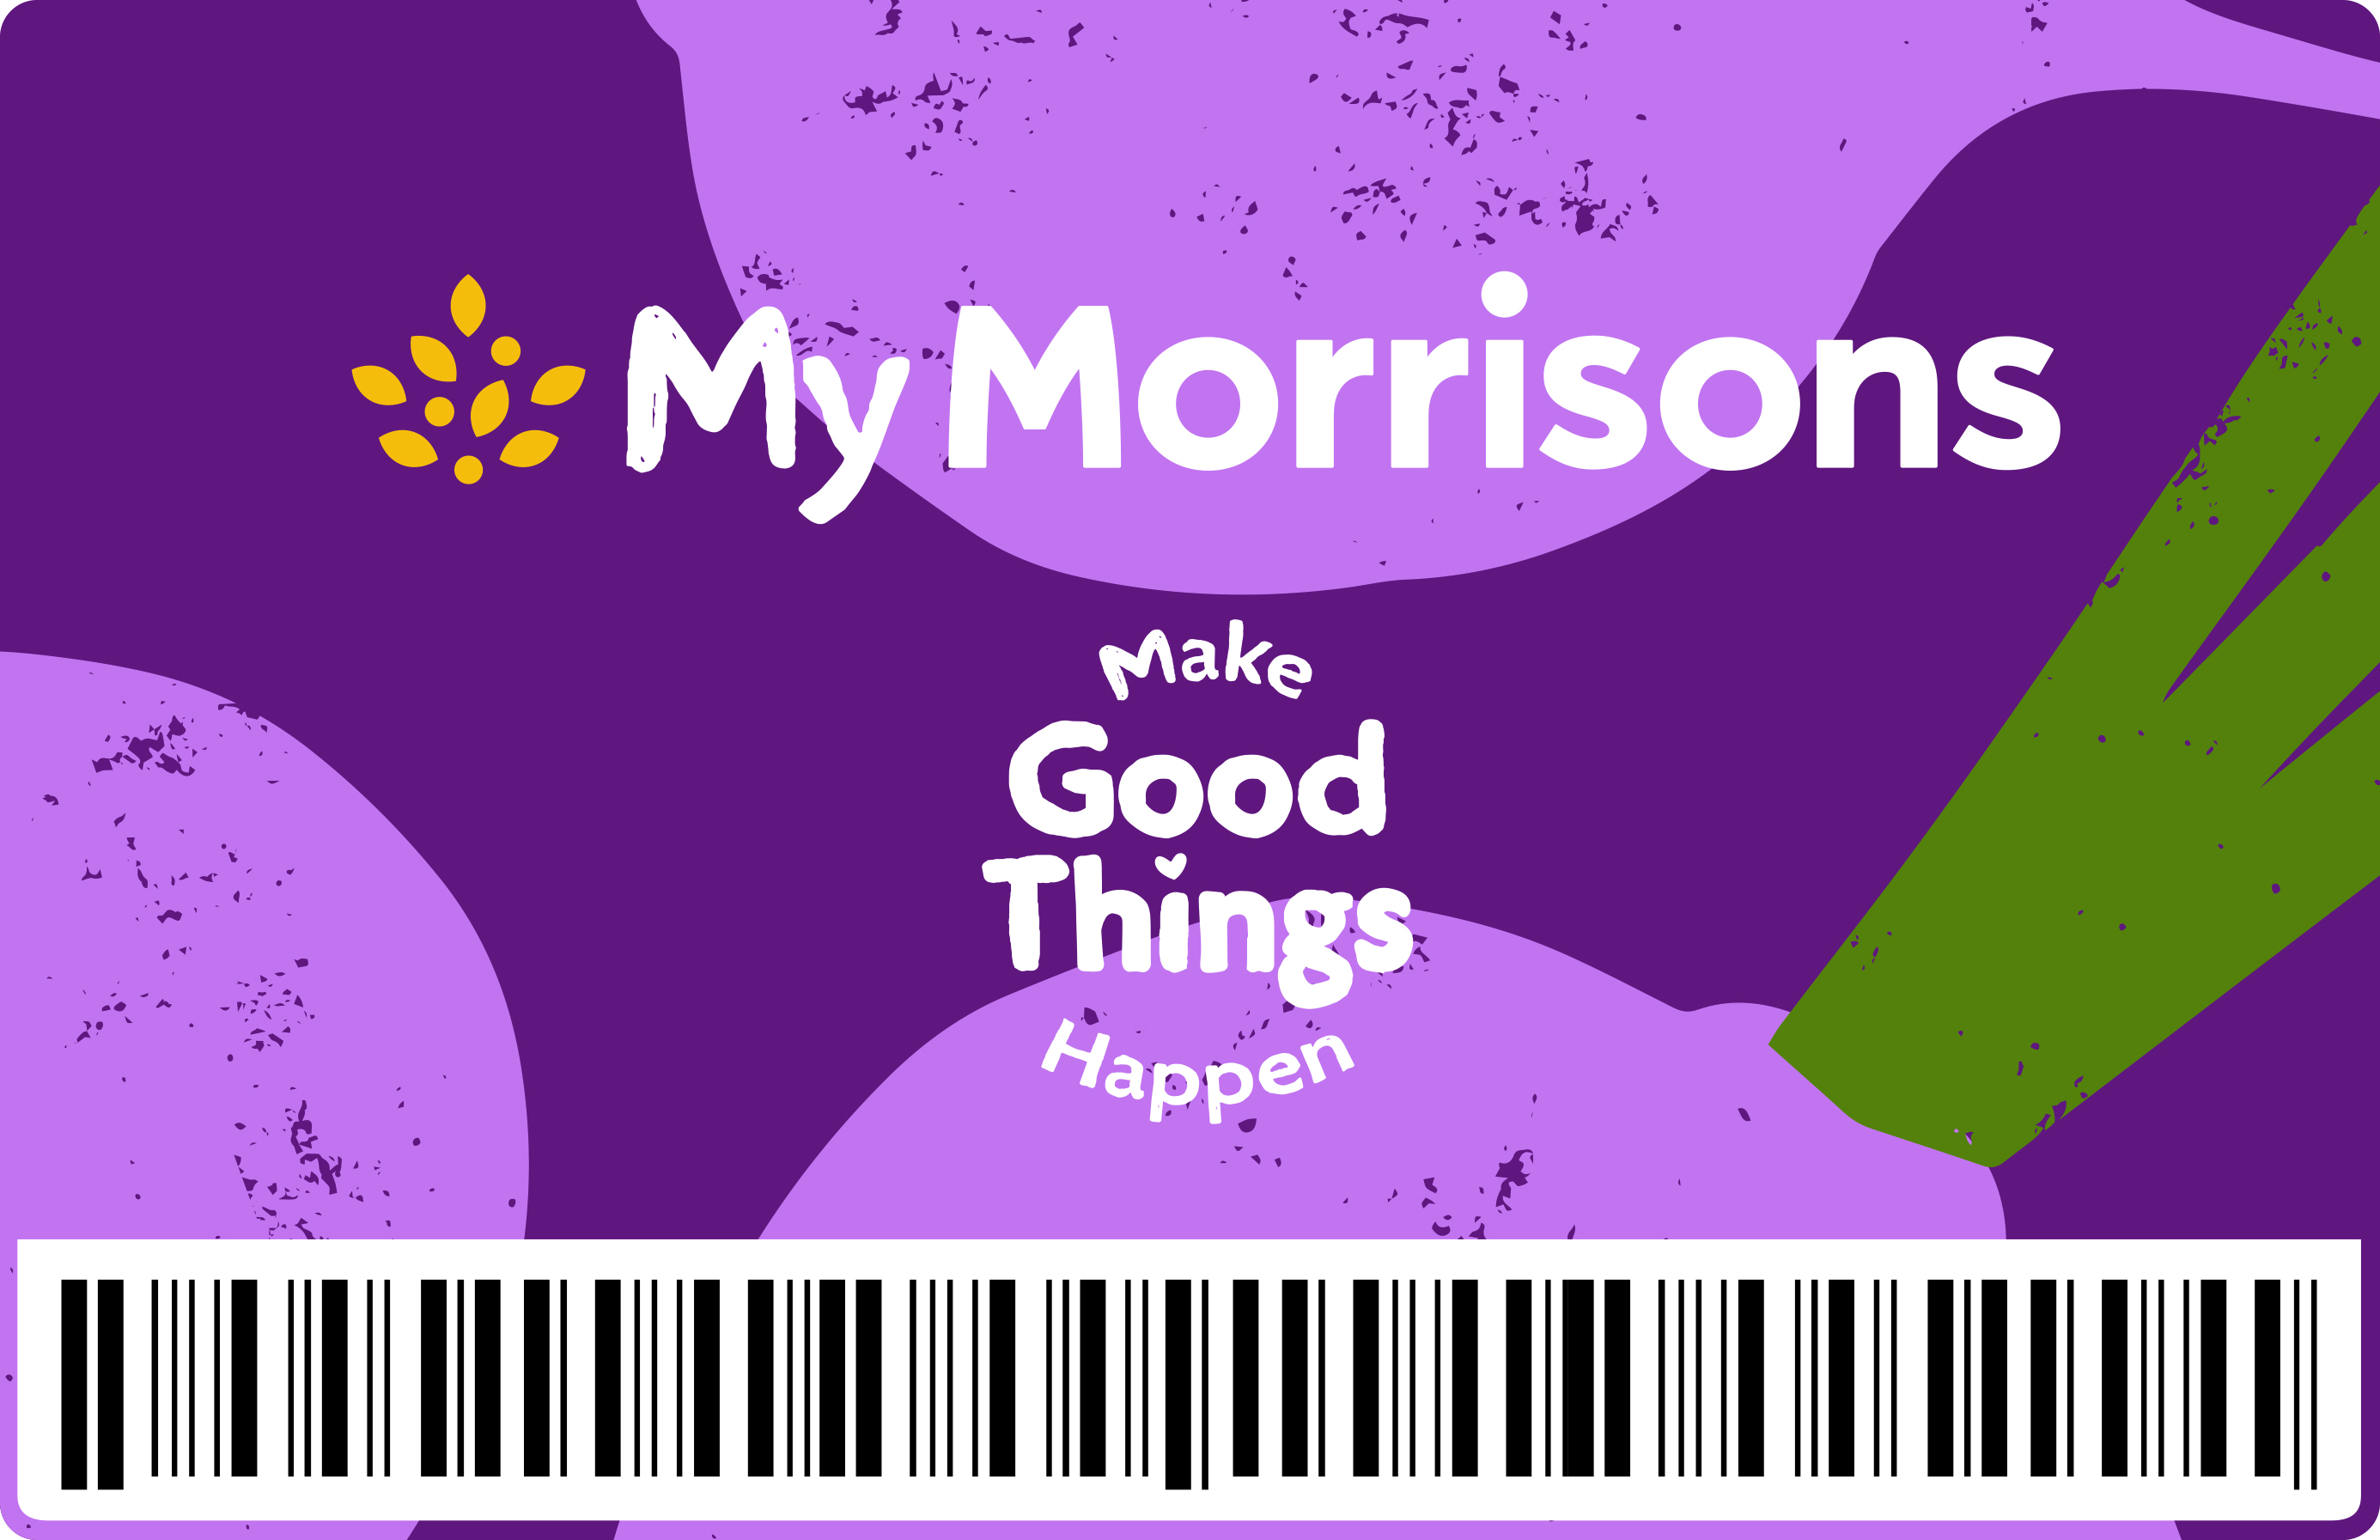 Morrisons launches new loyalty offer 'My Morrisons: Make Good Things Happen